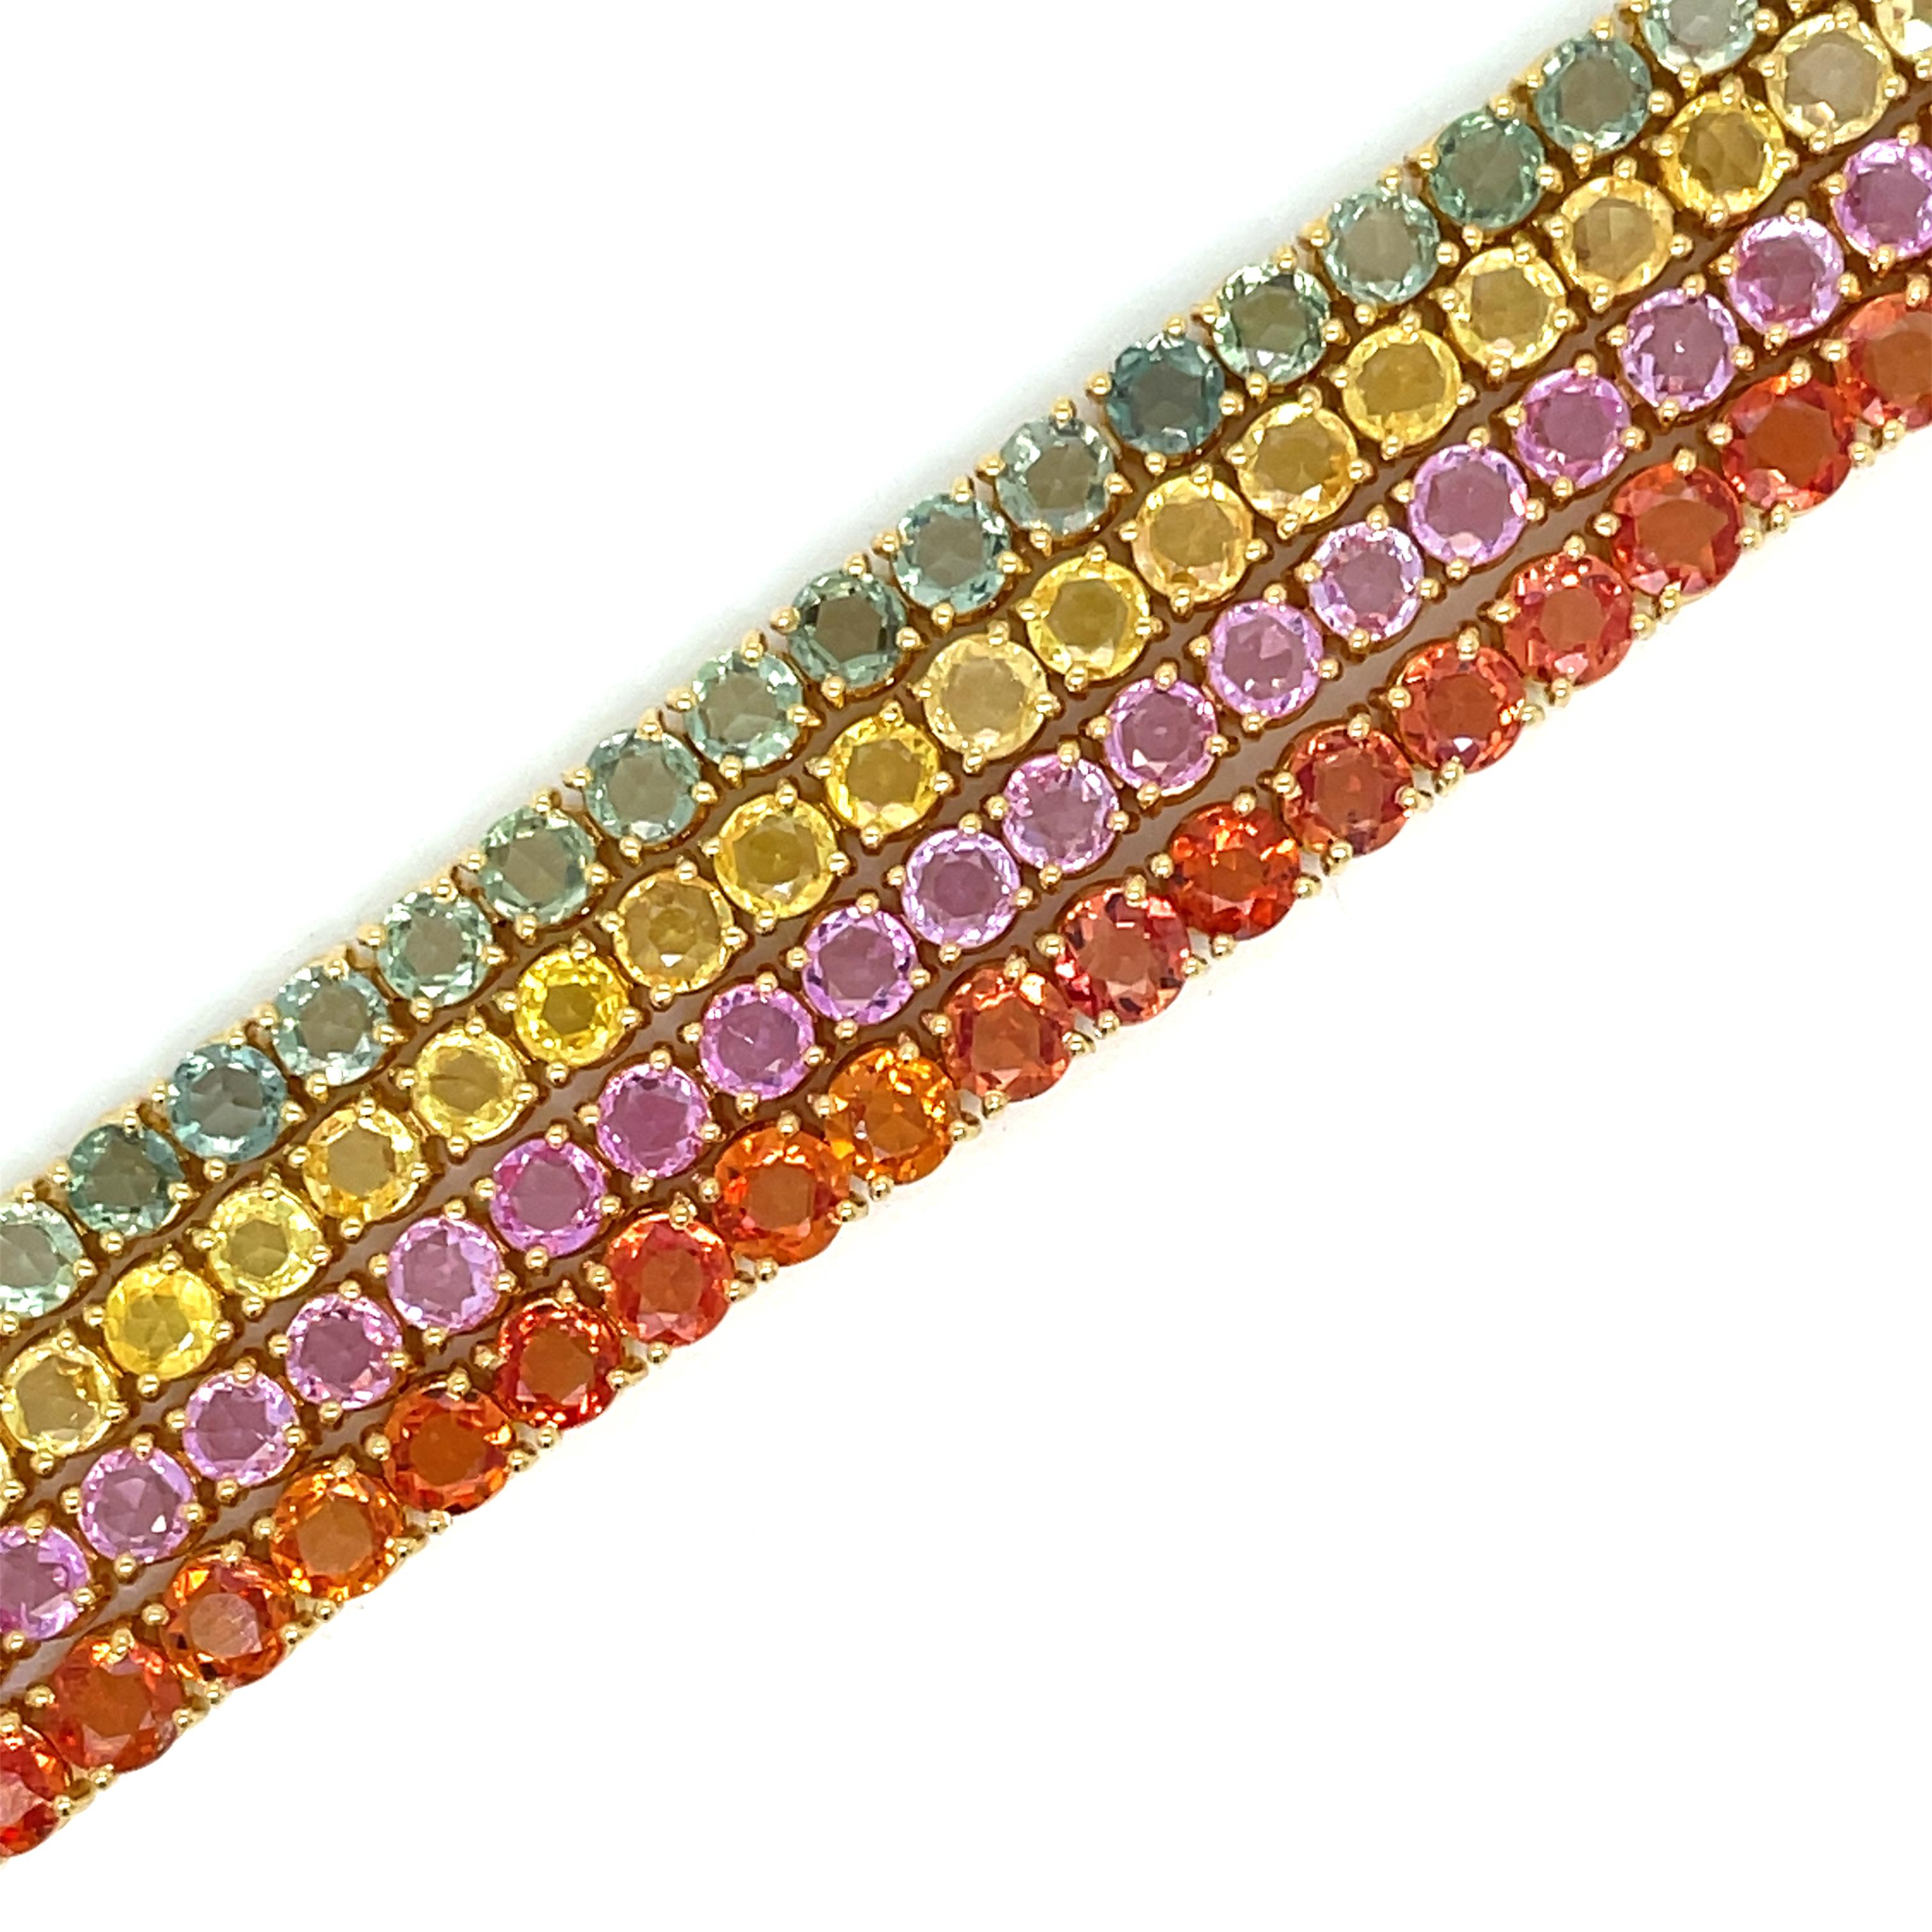 10 Carat Natural Pink Sapphire Yellow Gold Tennis Bracelet For Sale 4